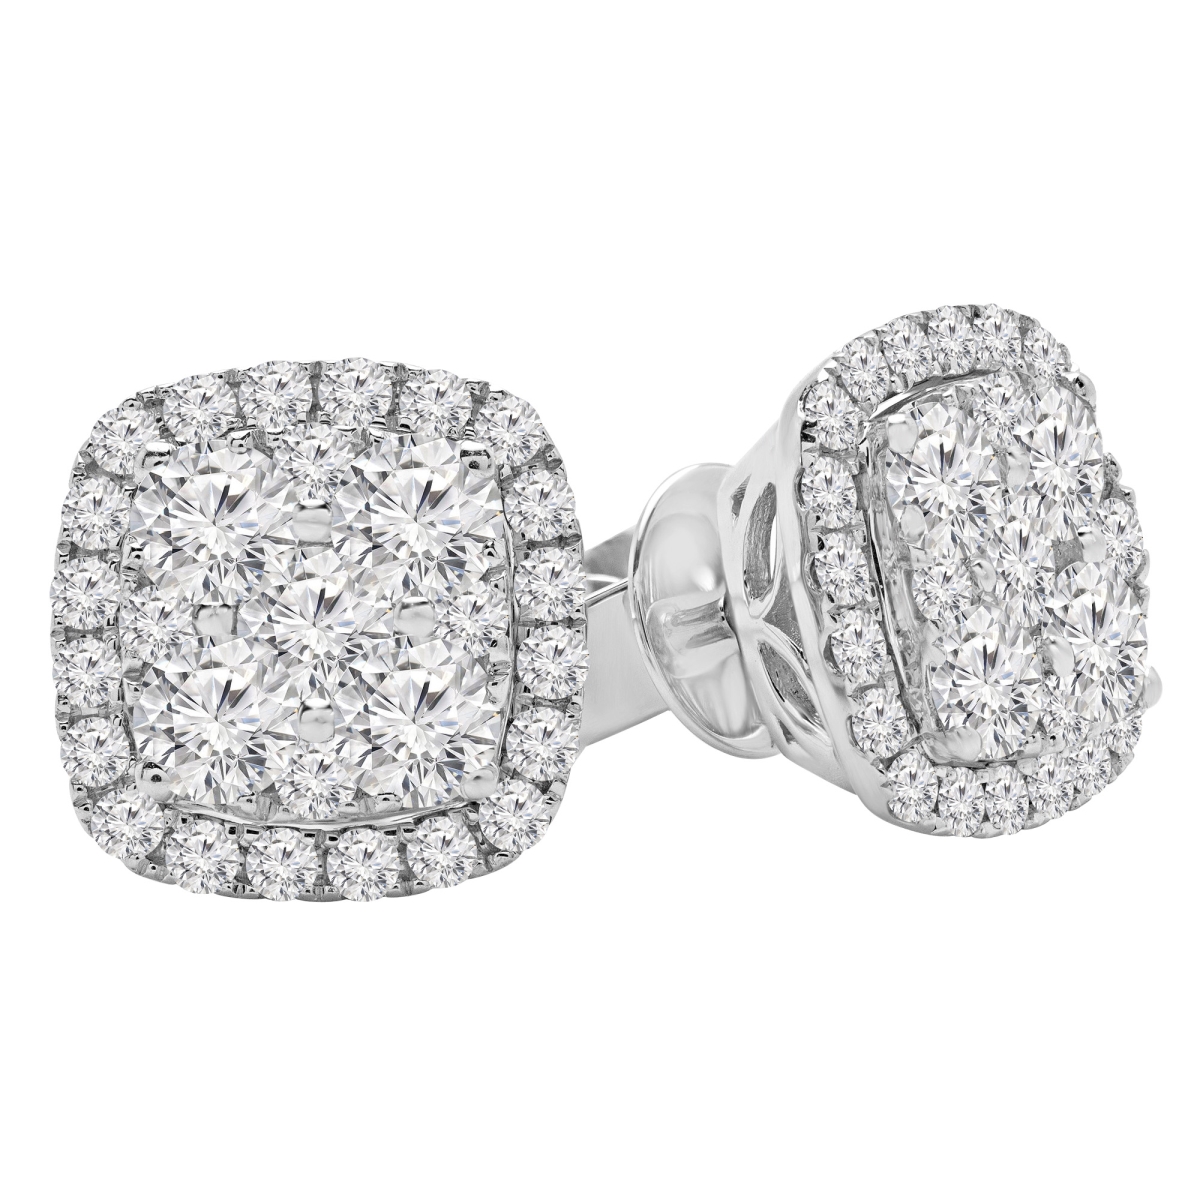 2.05 Ctw Round Diamond Cushion Halo Cluster Stud Earrings In 18k White Gold